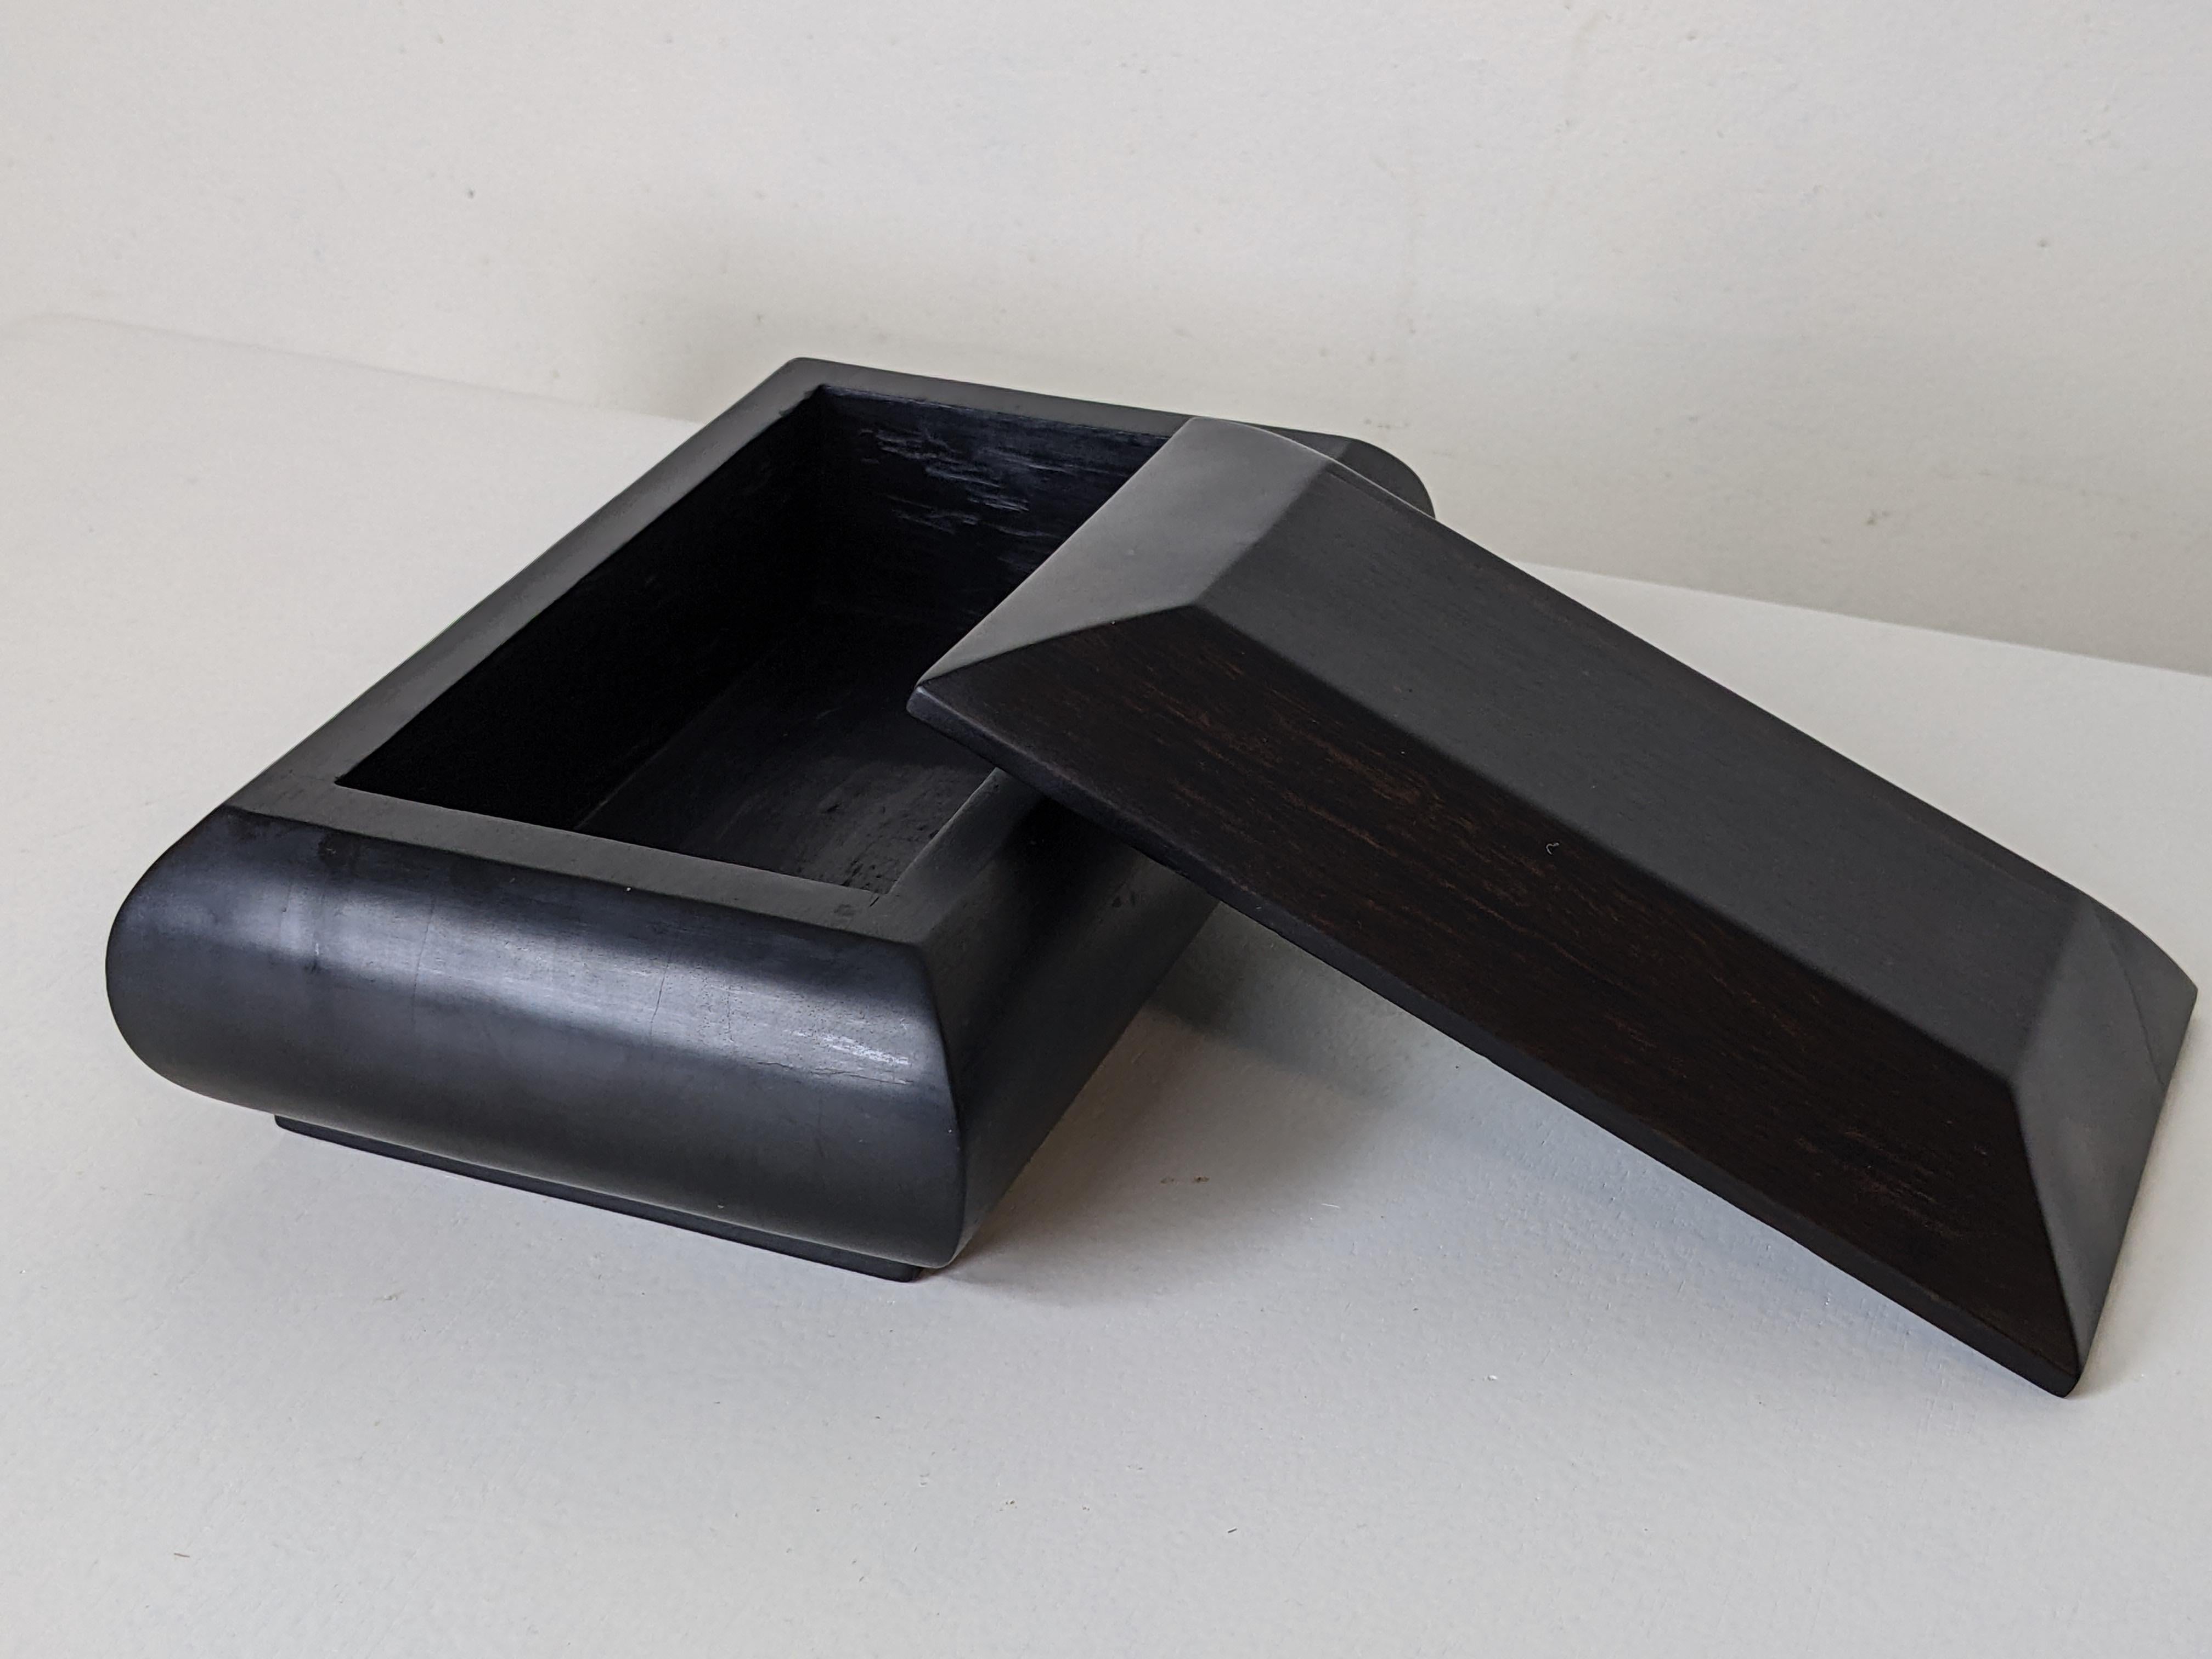 Art Deco Decorative Lidded Box in Solid Ebony Wood, France 1930s, 2 Available 3